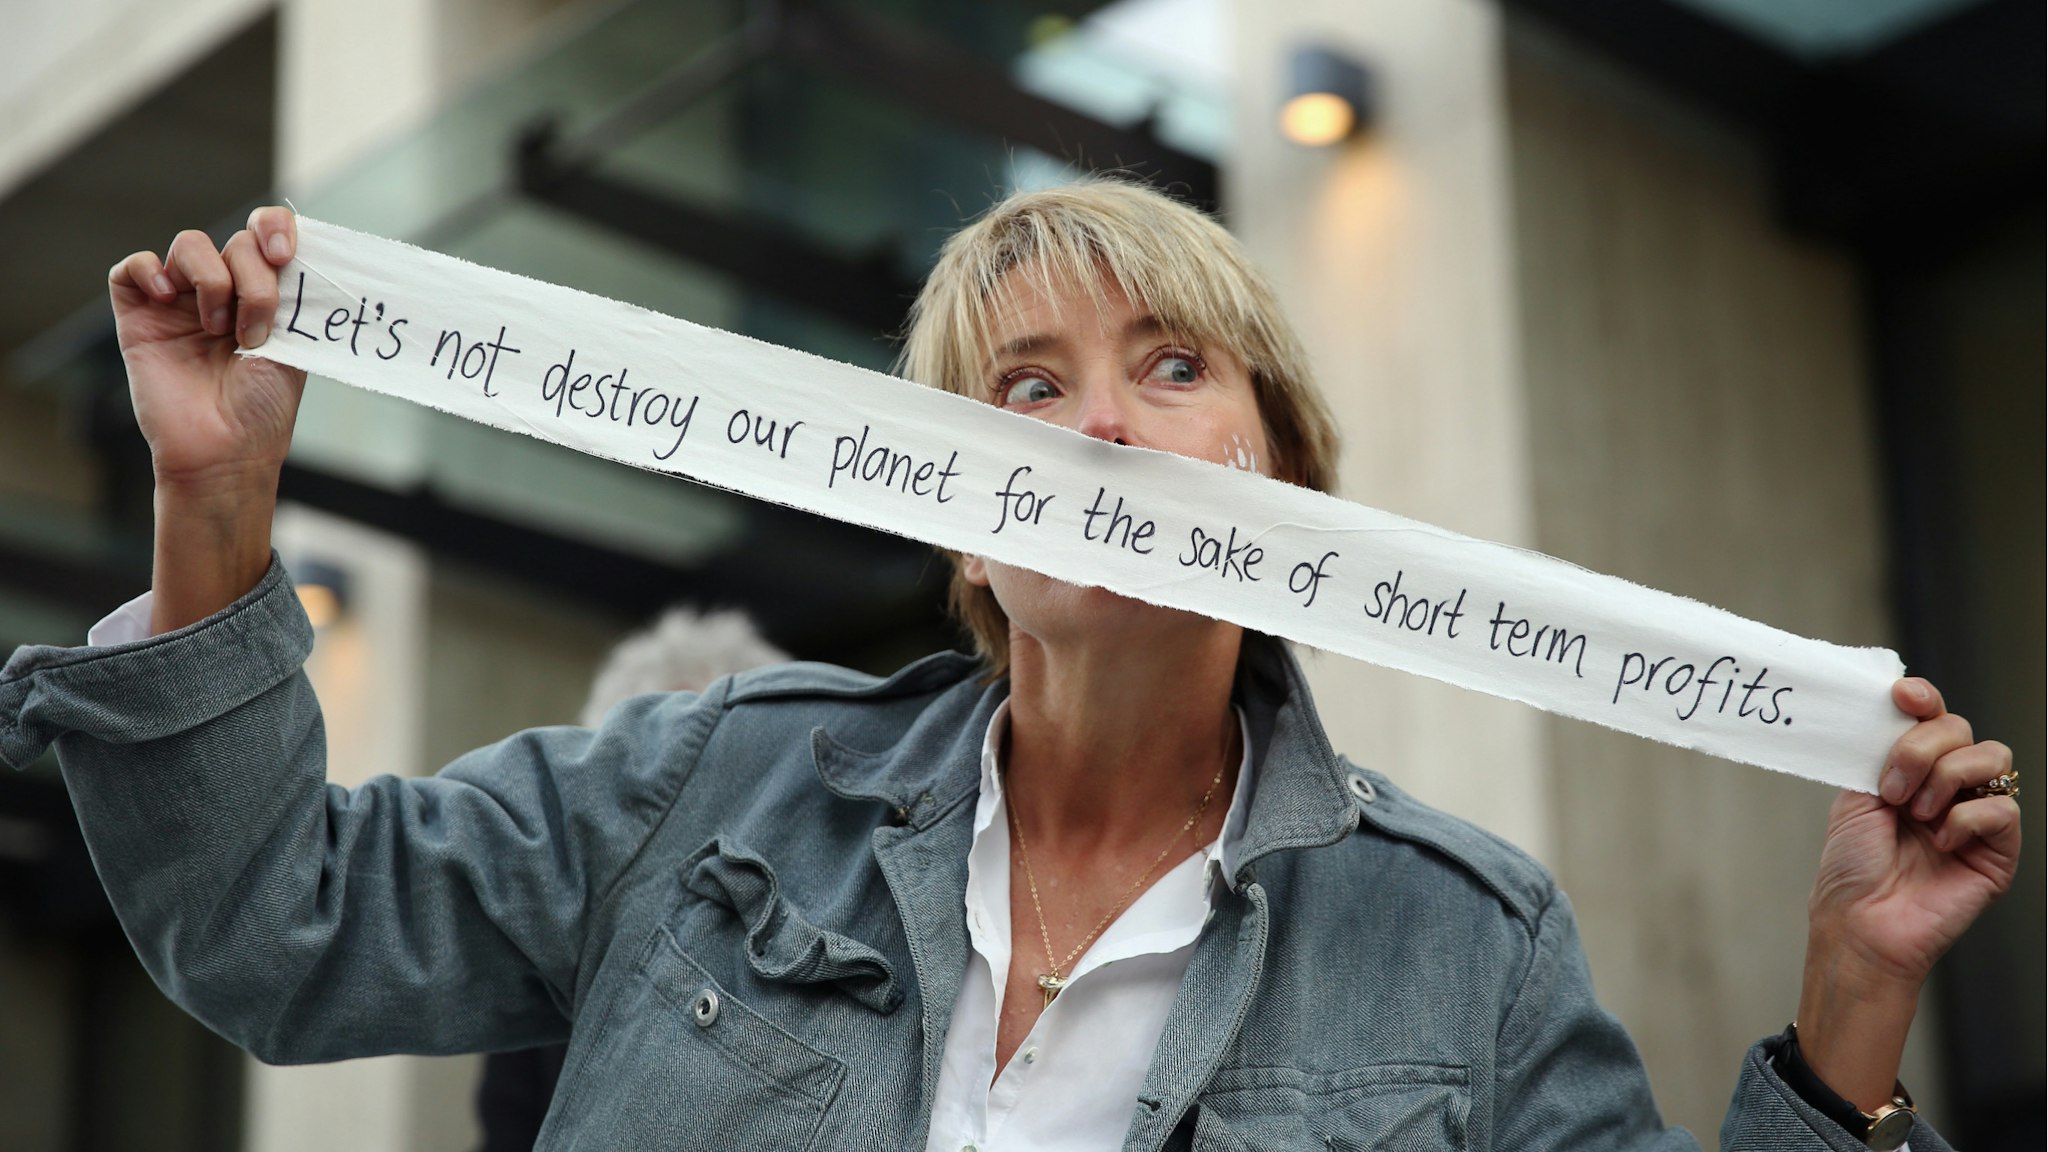 Actress Emma Thomson joins Greenpeace climate change activists outside the Shell building on September 29, 2015 in London, England.